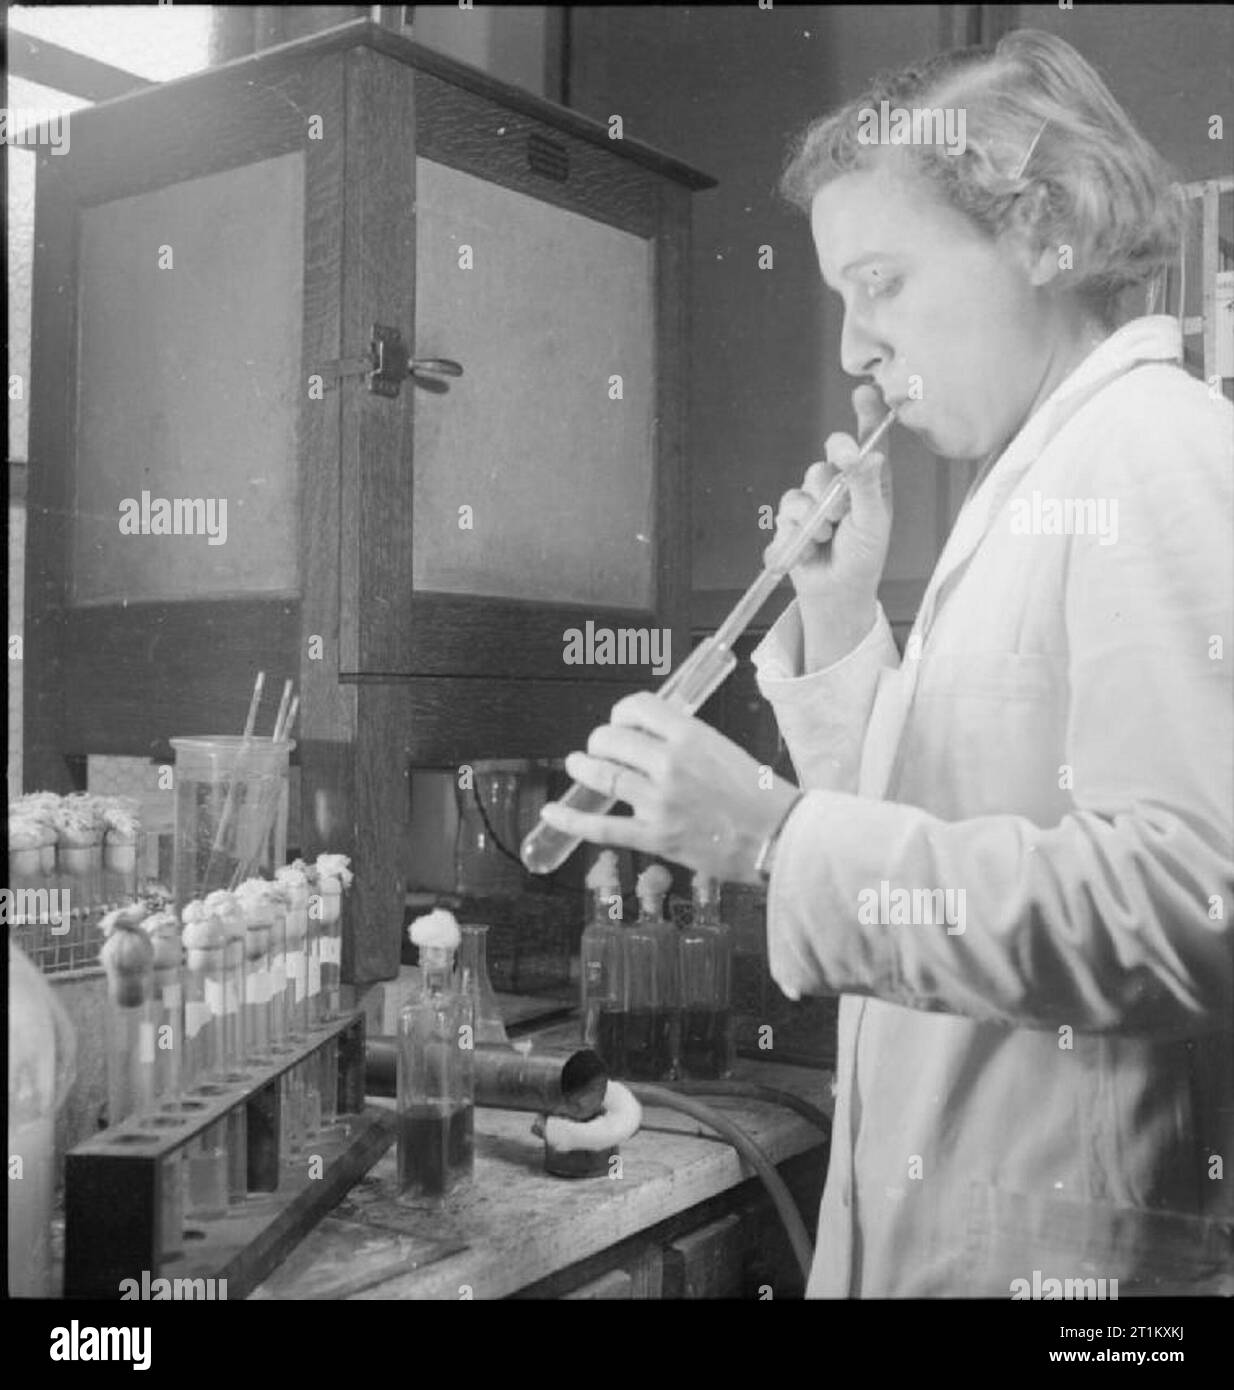 Blood Drying Unit- Processing Blood in the Laboratory, Cambridge, England, UK, 1943 A member of staff at the blood drying unit based at Cambridge University draws sterile, filtered plasma from test tubes into standard transfusion bottles. She is using a pipette-type piece of apparatus to suck the liquid with her mouth into the pipette to transfer the plasma into the bottles. Stock Photo